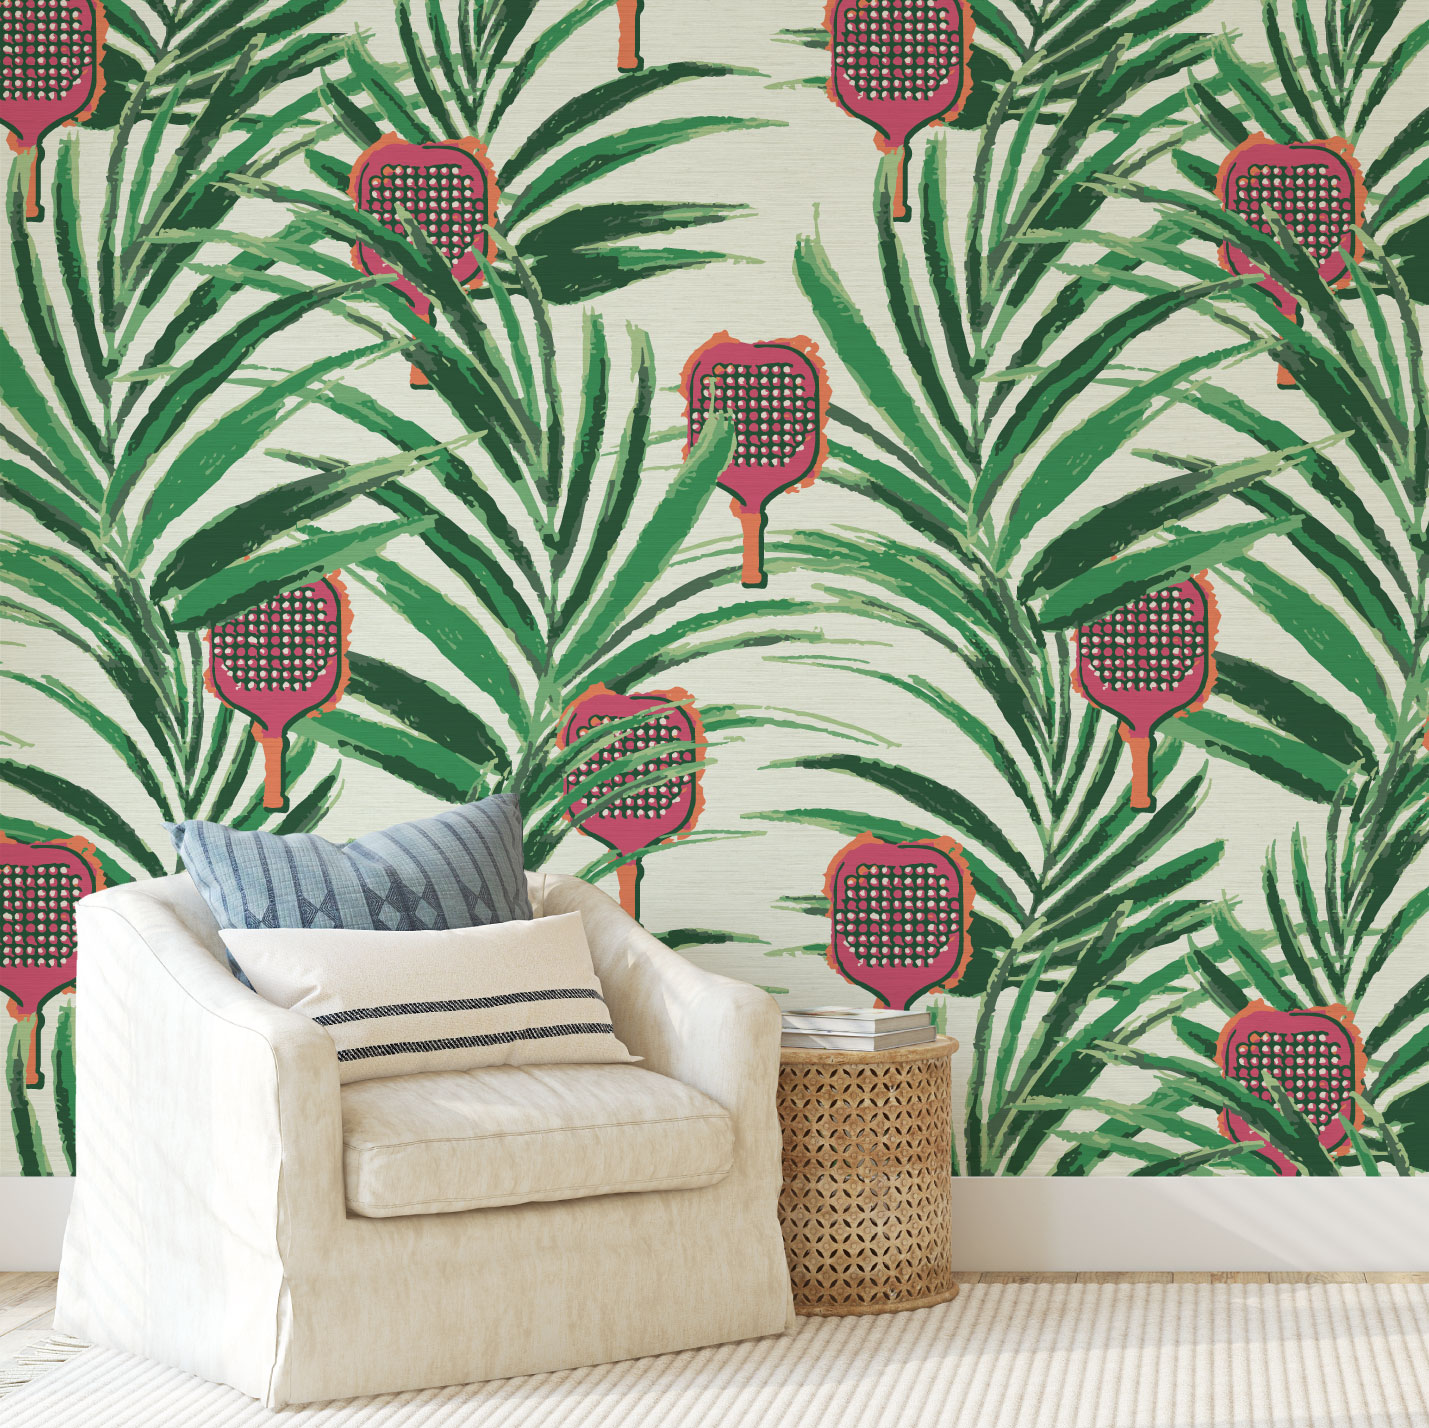 pickleball grasscloth wallpaper texture Eco-Friendly Non-toxic High-quality  Sustainable bold jungle tropical retro chic garden botanical sport vacation beach coastal